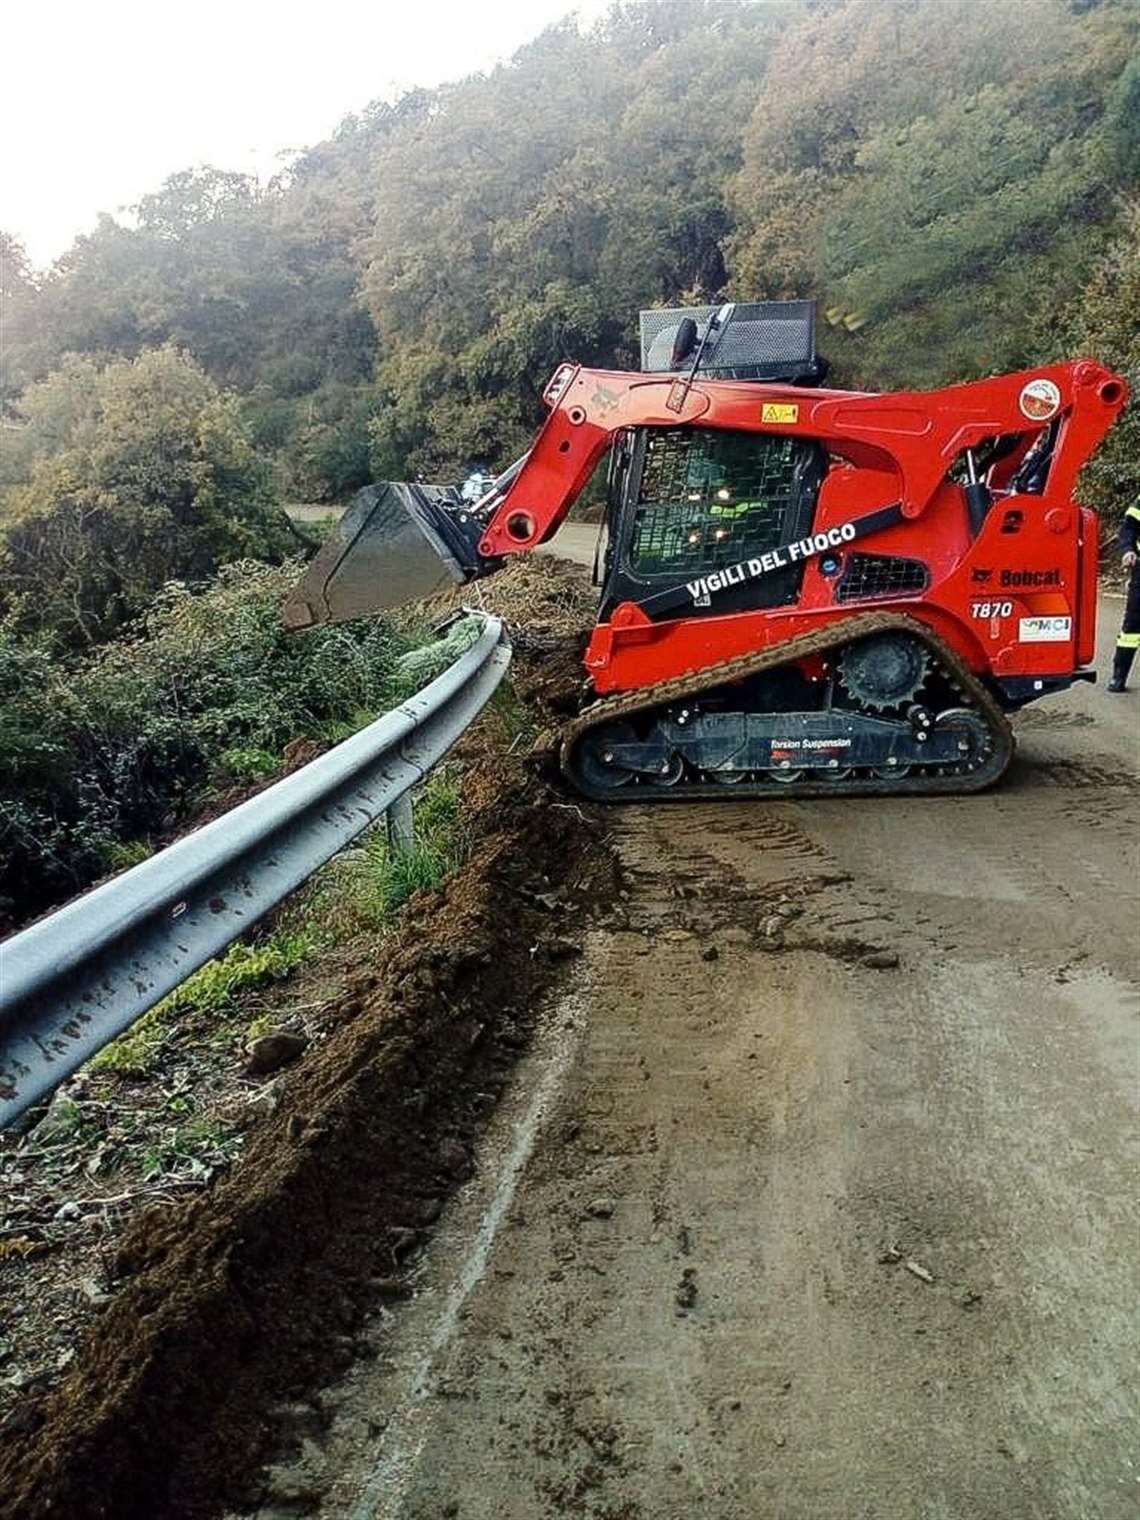 Providing access: The Bobcat T870 clears debris after a mud slide on a mountain road.